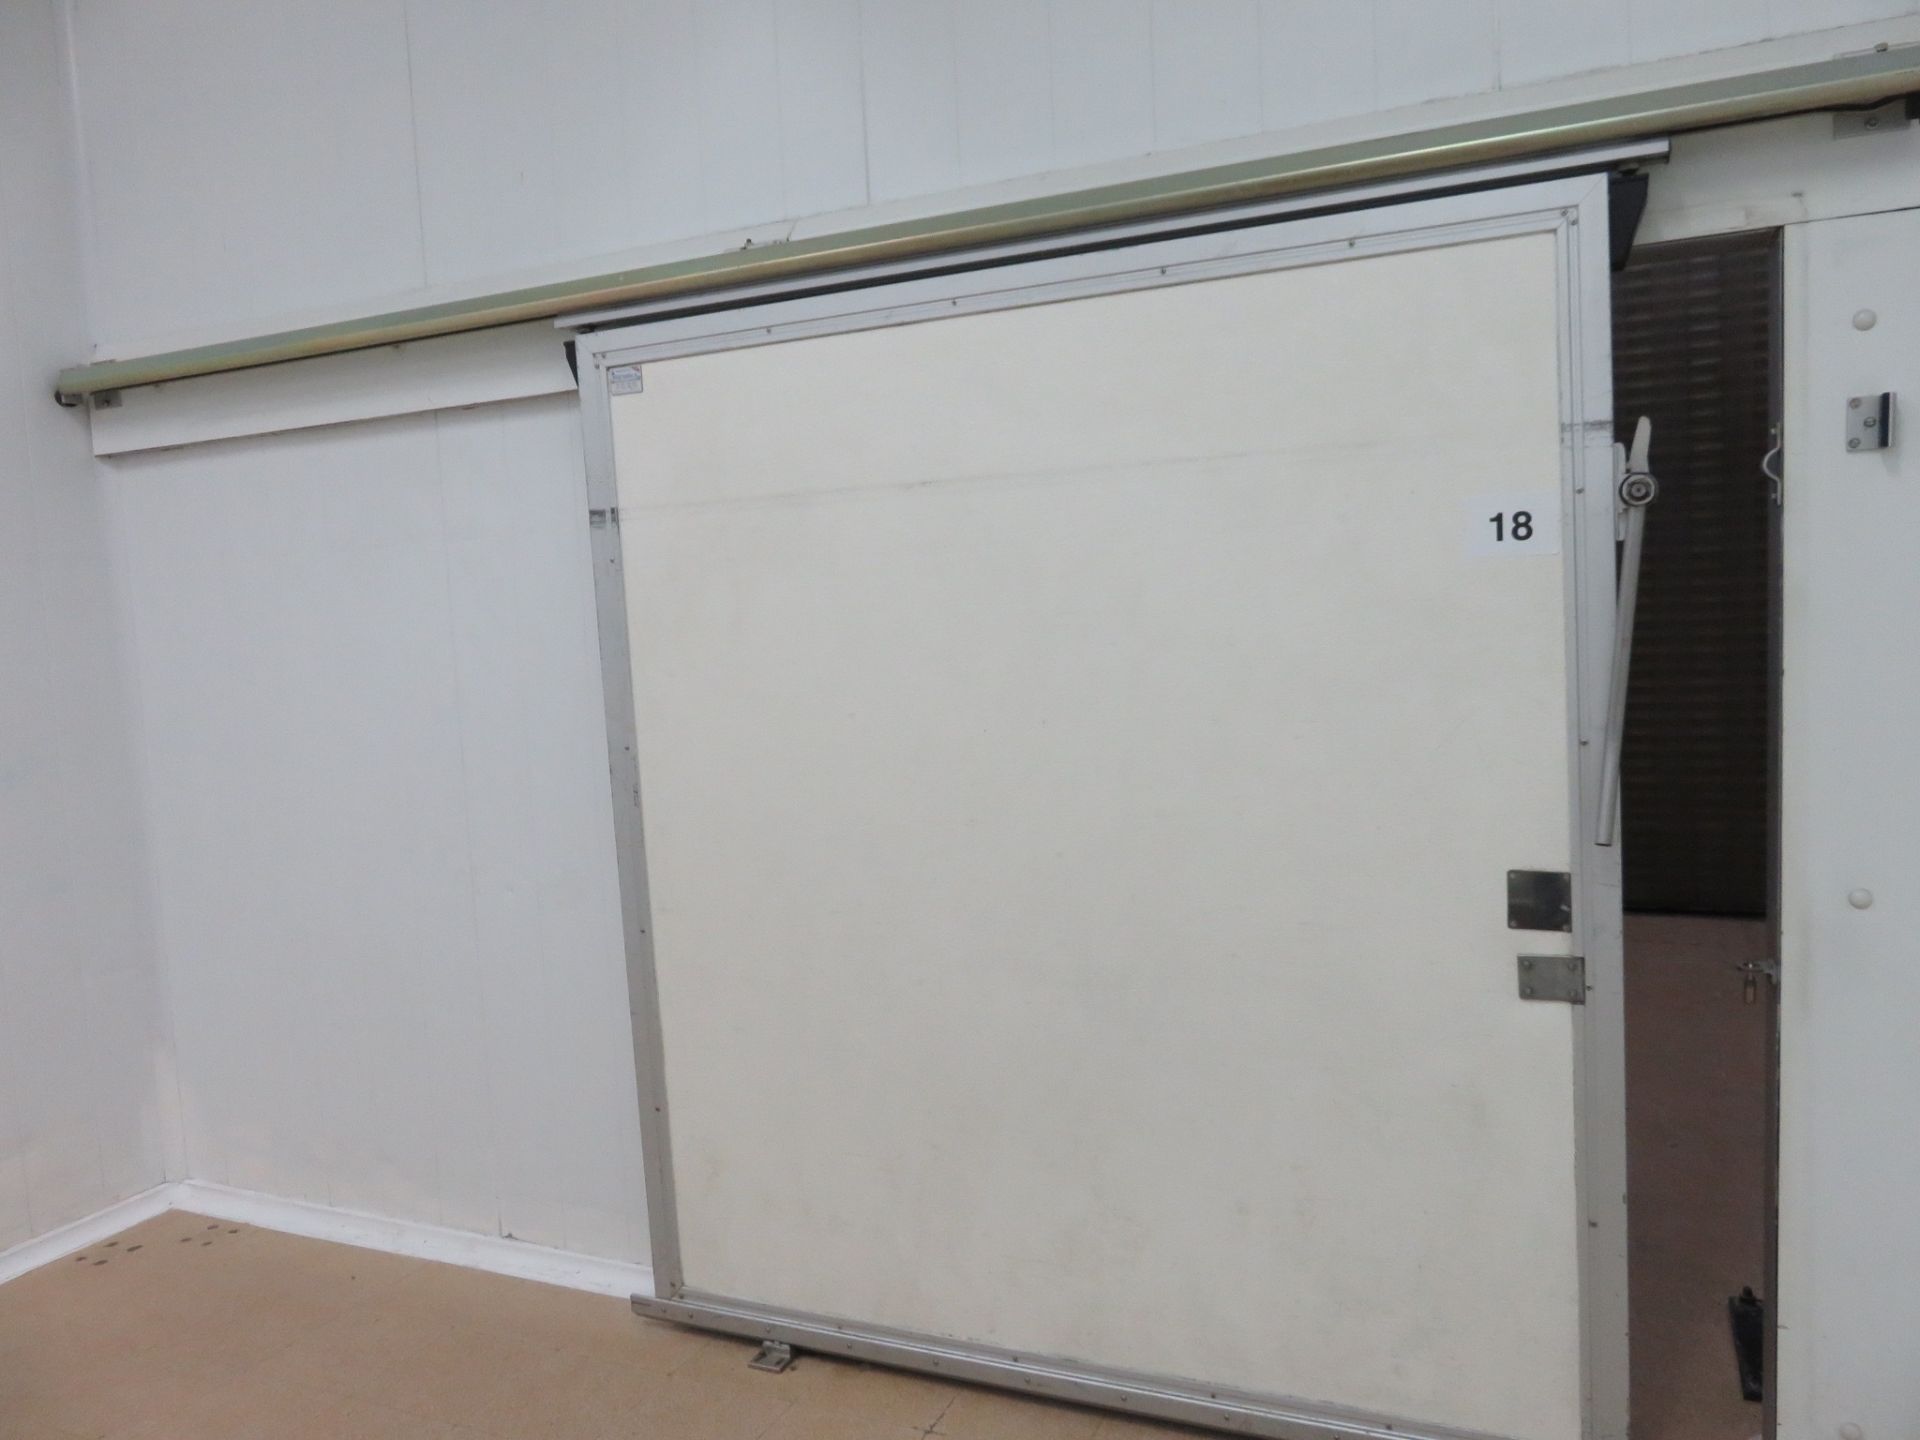 Refrigerated Sliding Door with running gear. Approx 2000mm wide x 2200mm high. Lift Out £120